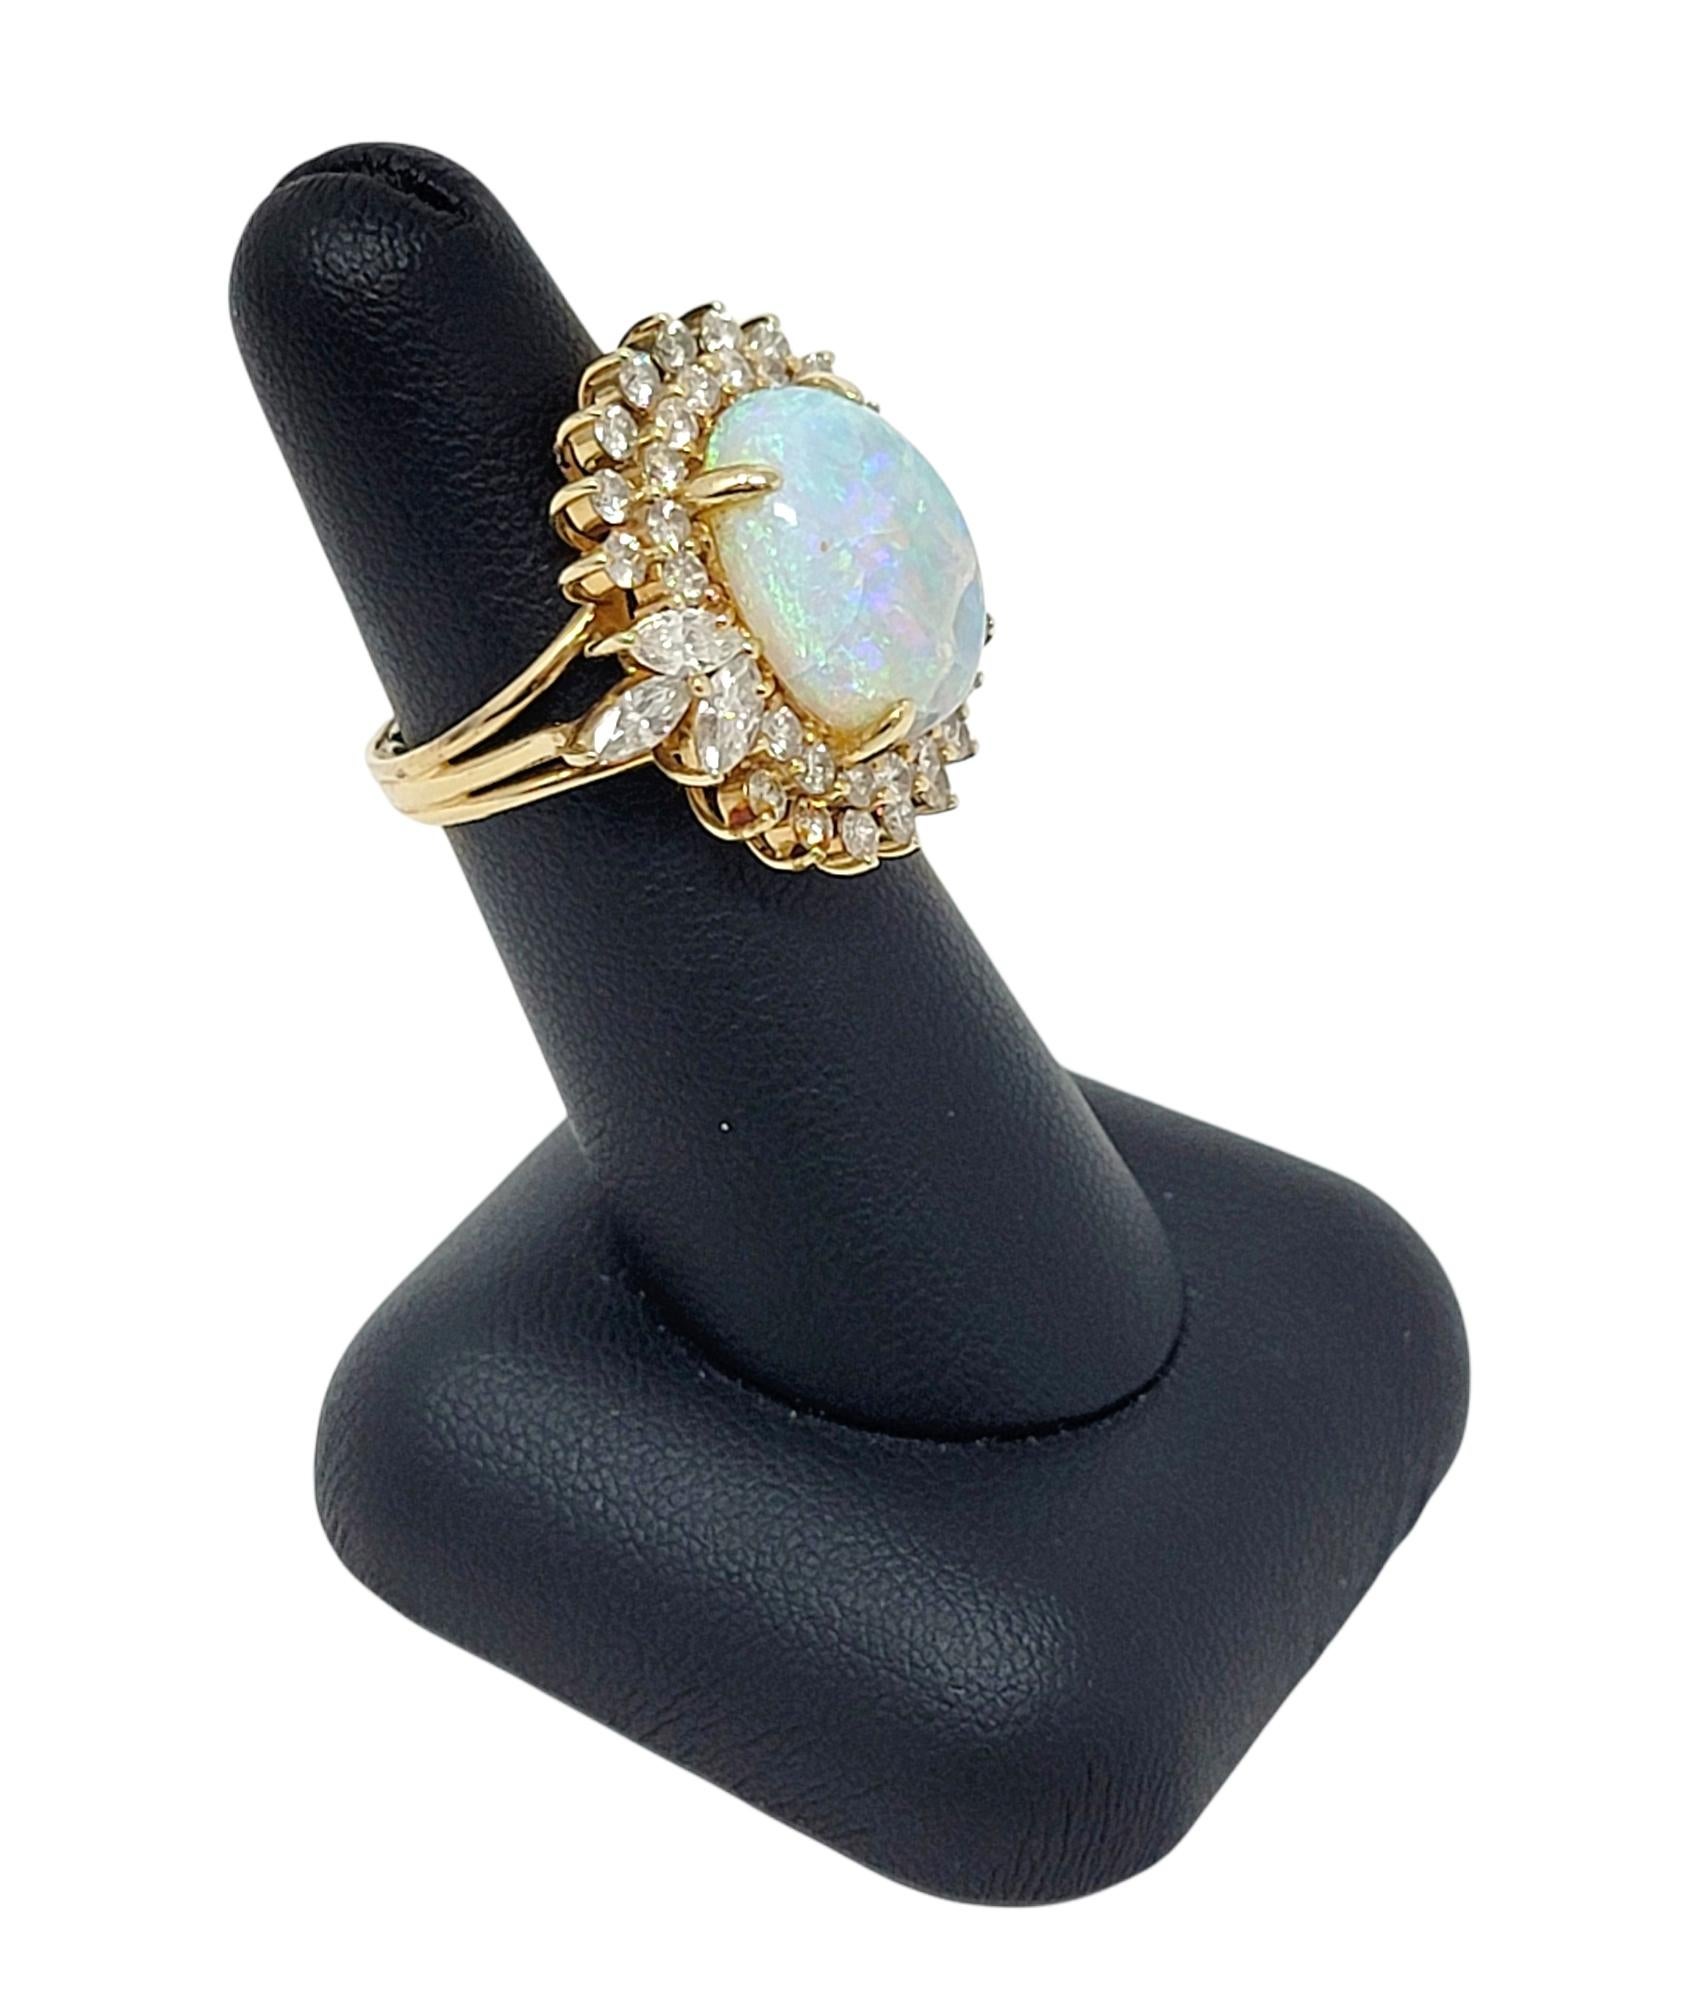 7.55 Carats Total Opal Cabochon and Diamond Halo Ring in 14 Karat Yellow Gold For Sale 7